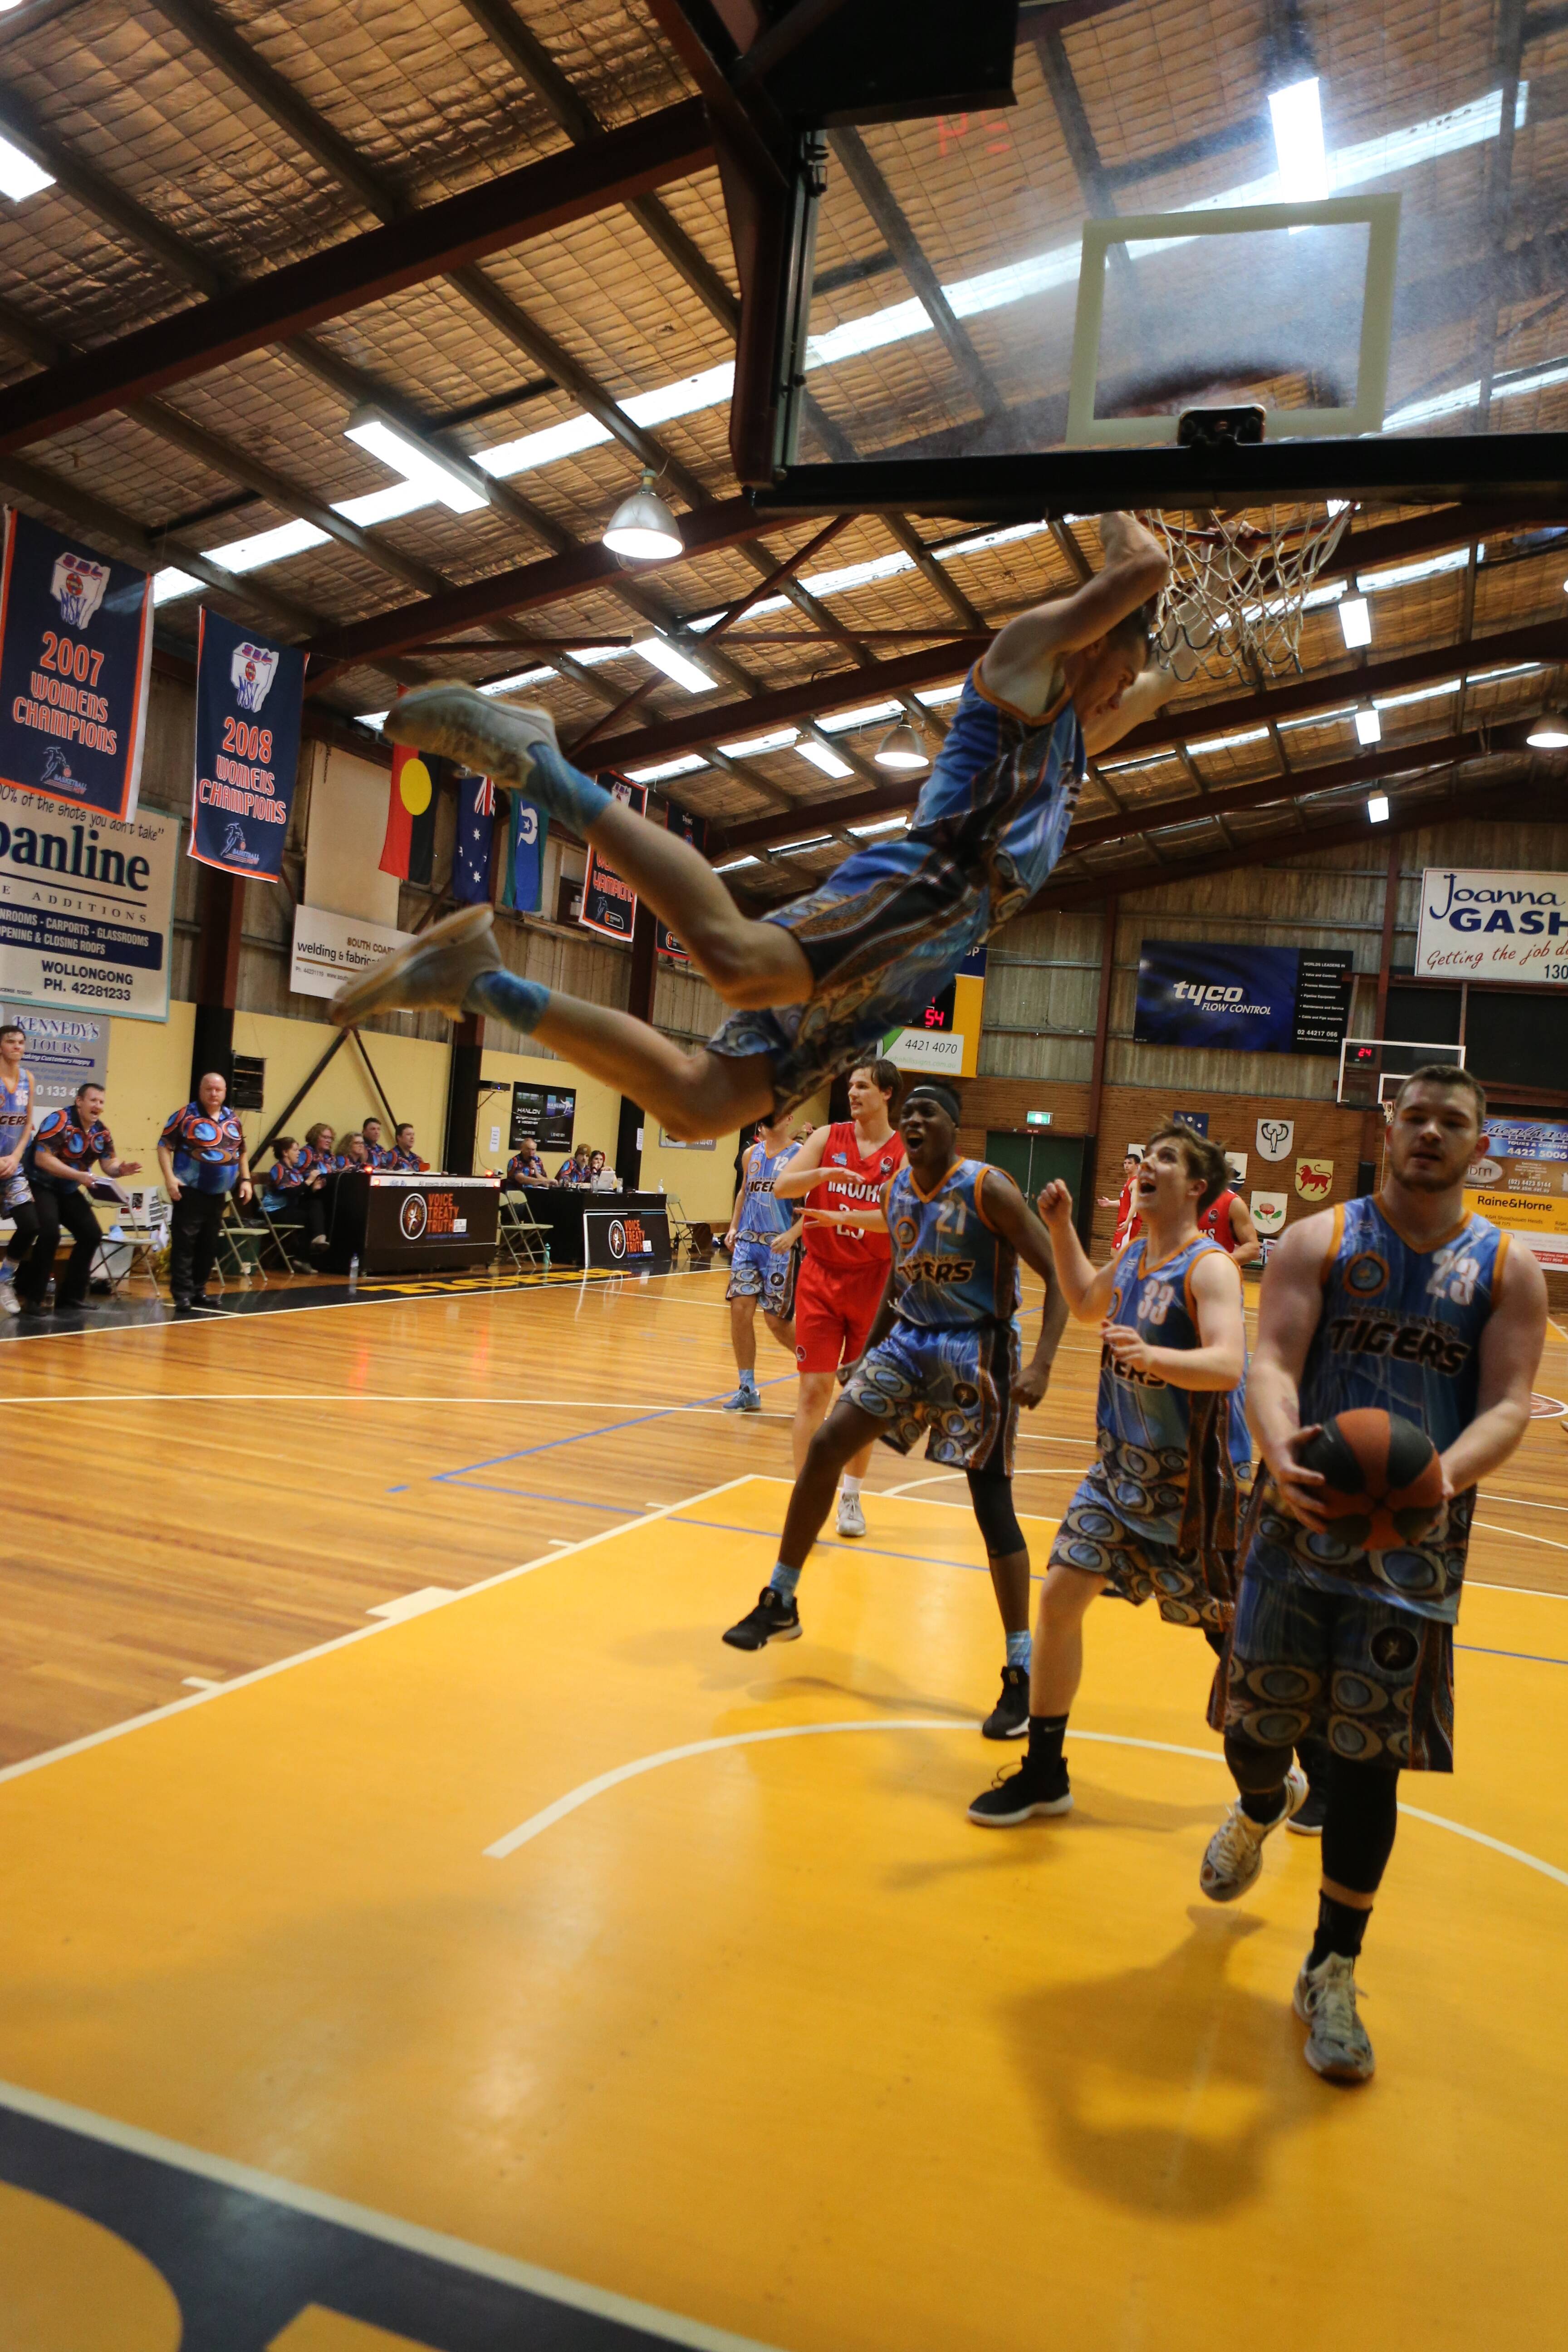 Canberra Capitals to play in Nowra, South Coast Register